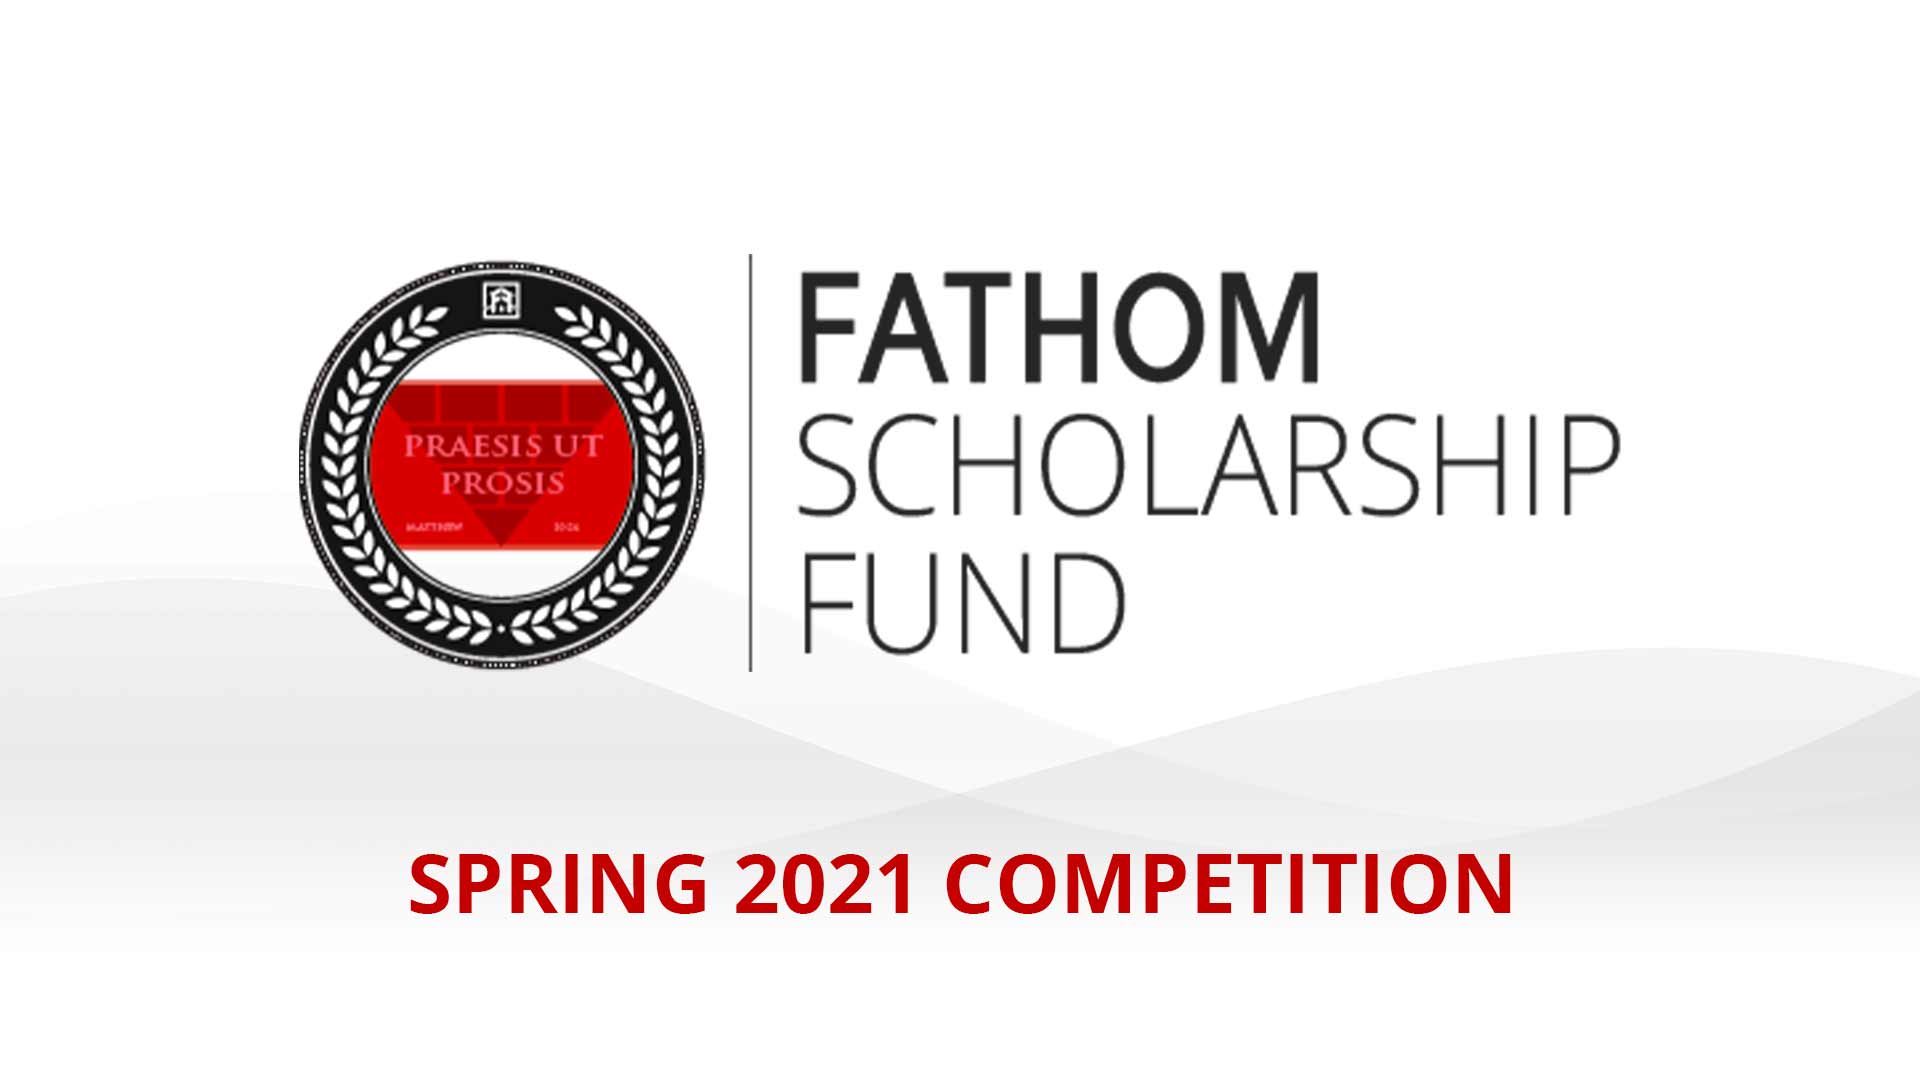 Featured image for “Spring 2021 Fathom Scholarship Program Competition”